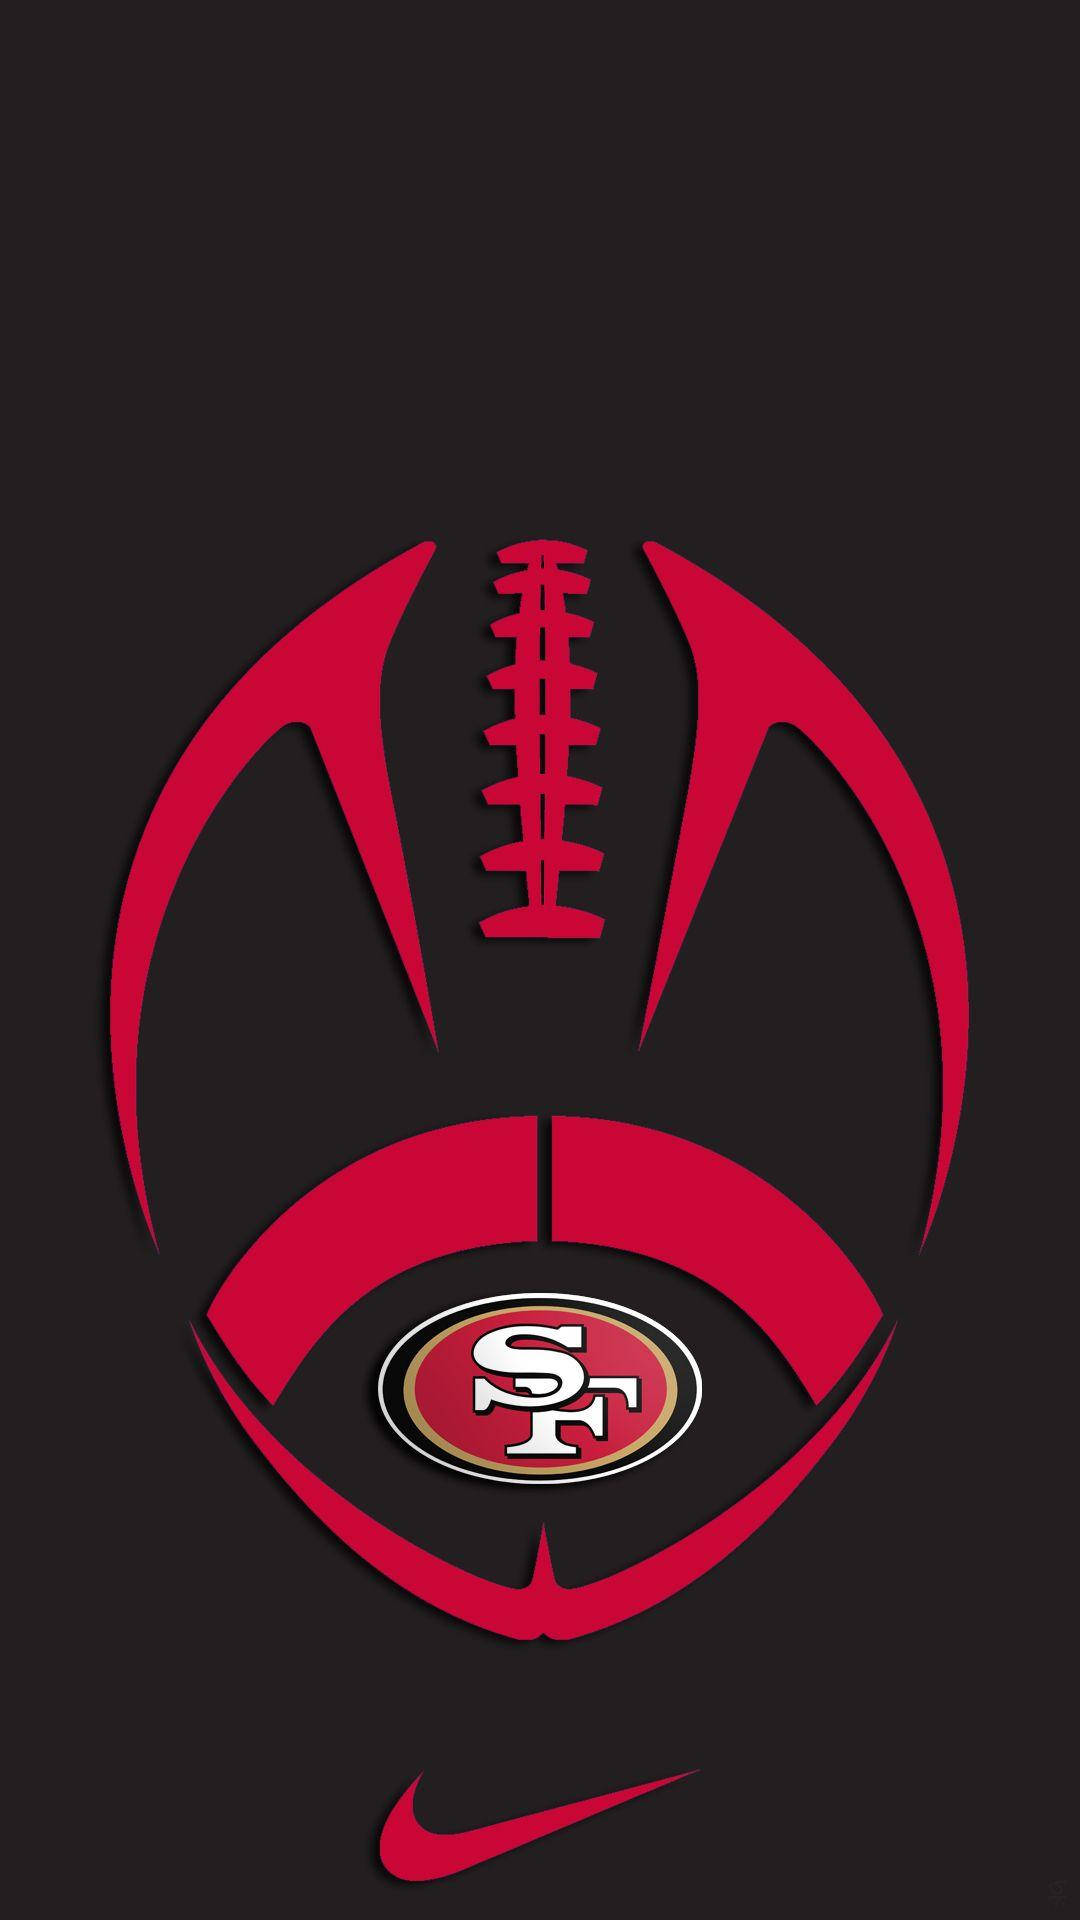 Free 49ers Wallpaper Downloads, 49ers Wallpaper for FREE